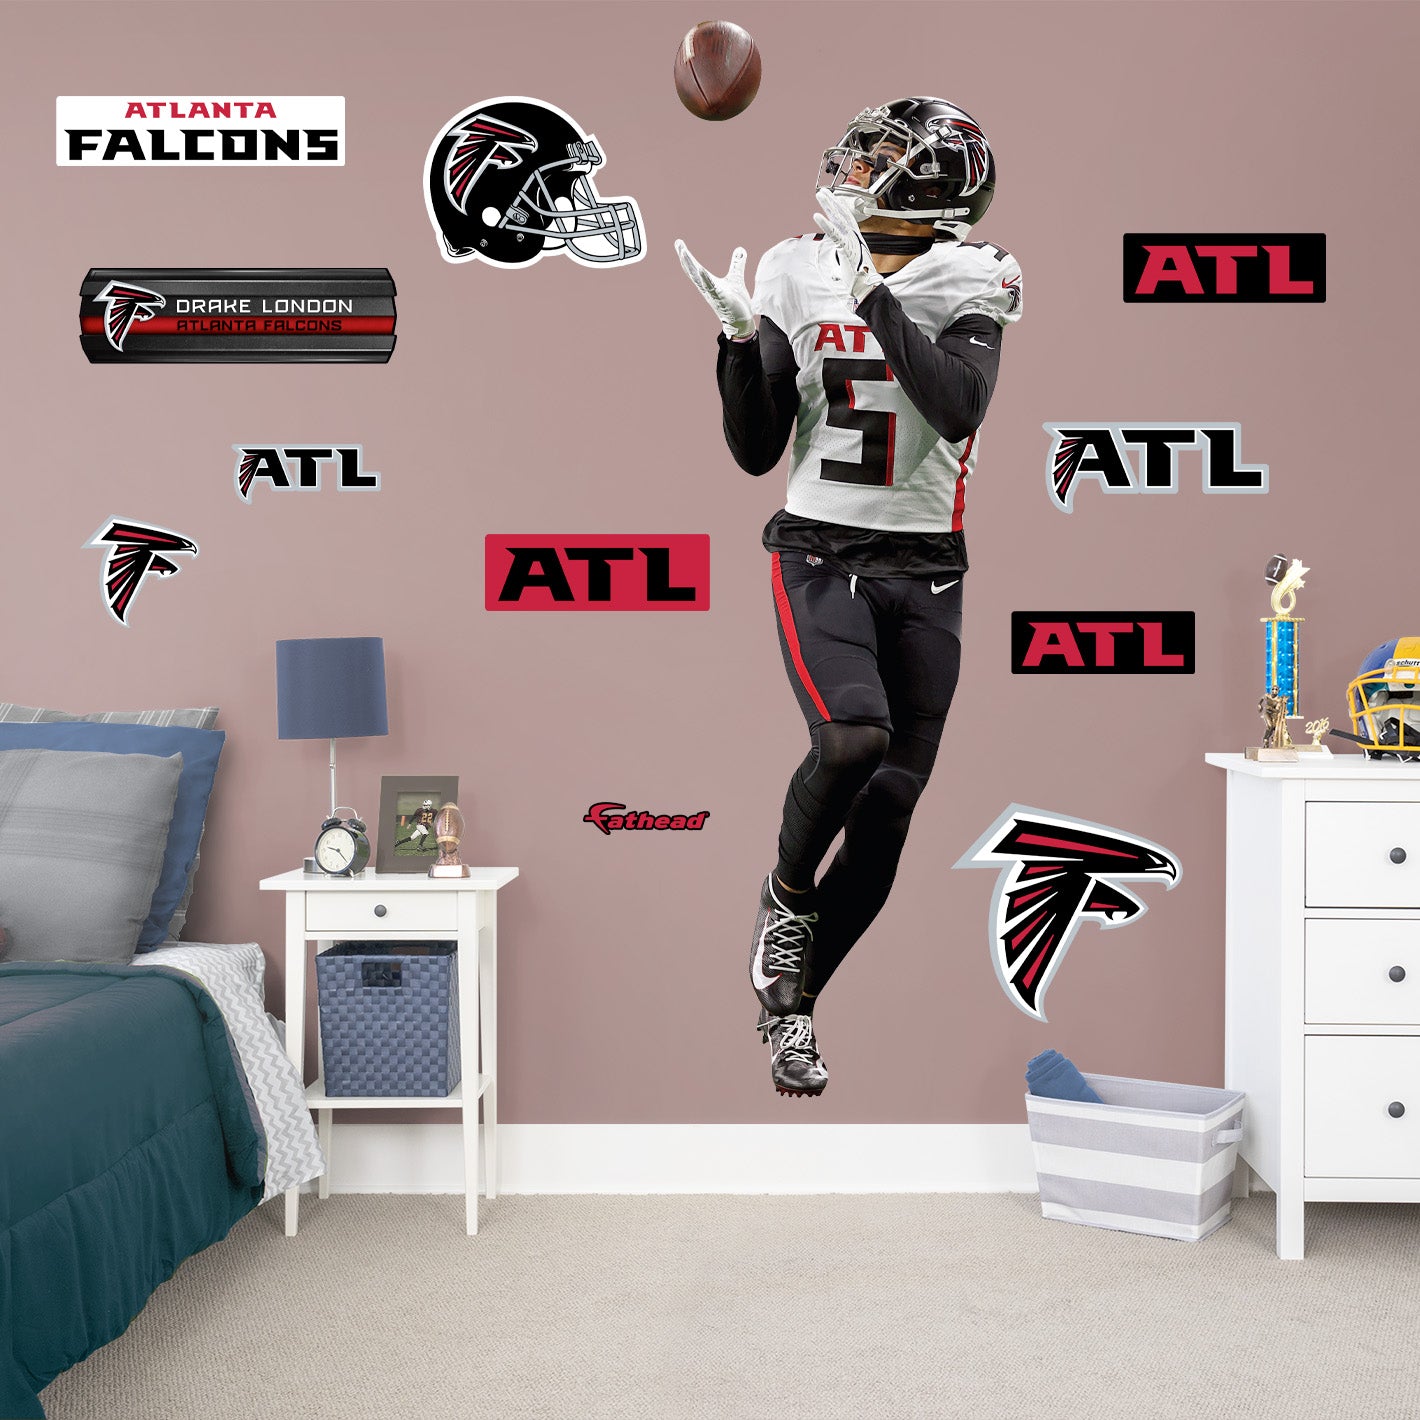 Atlanta Falcons: Drake London         - Officially Licensed NFL Removable     Adhesive Decal